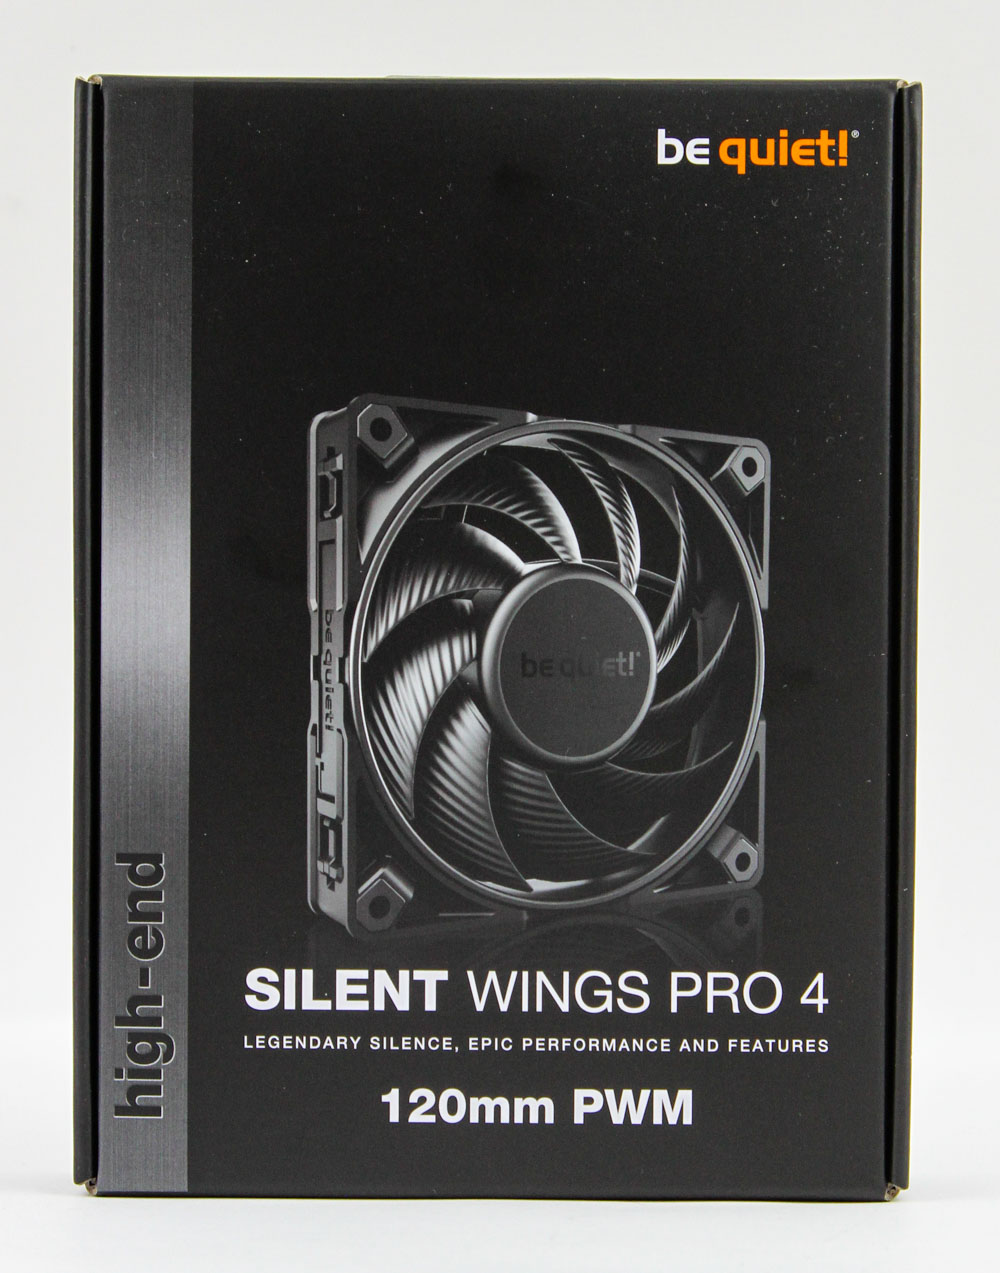 Fan quiet! TechPowerUp mm be 4 | Packaging 120 Pro Review Accessories Wings PWM - Silent &